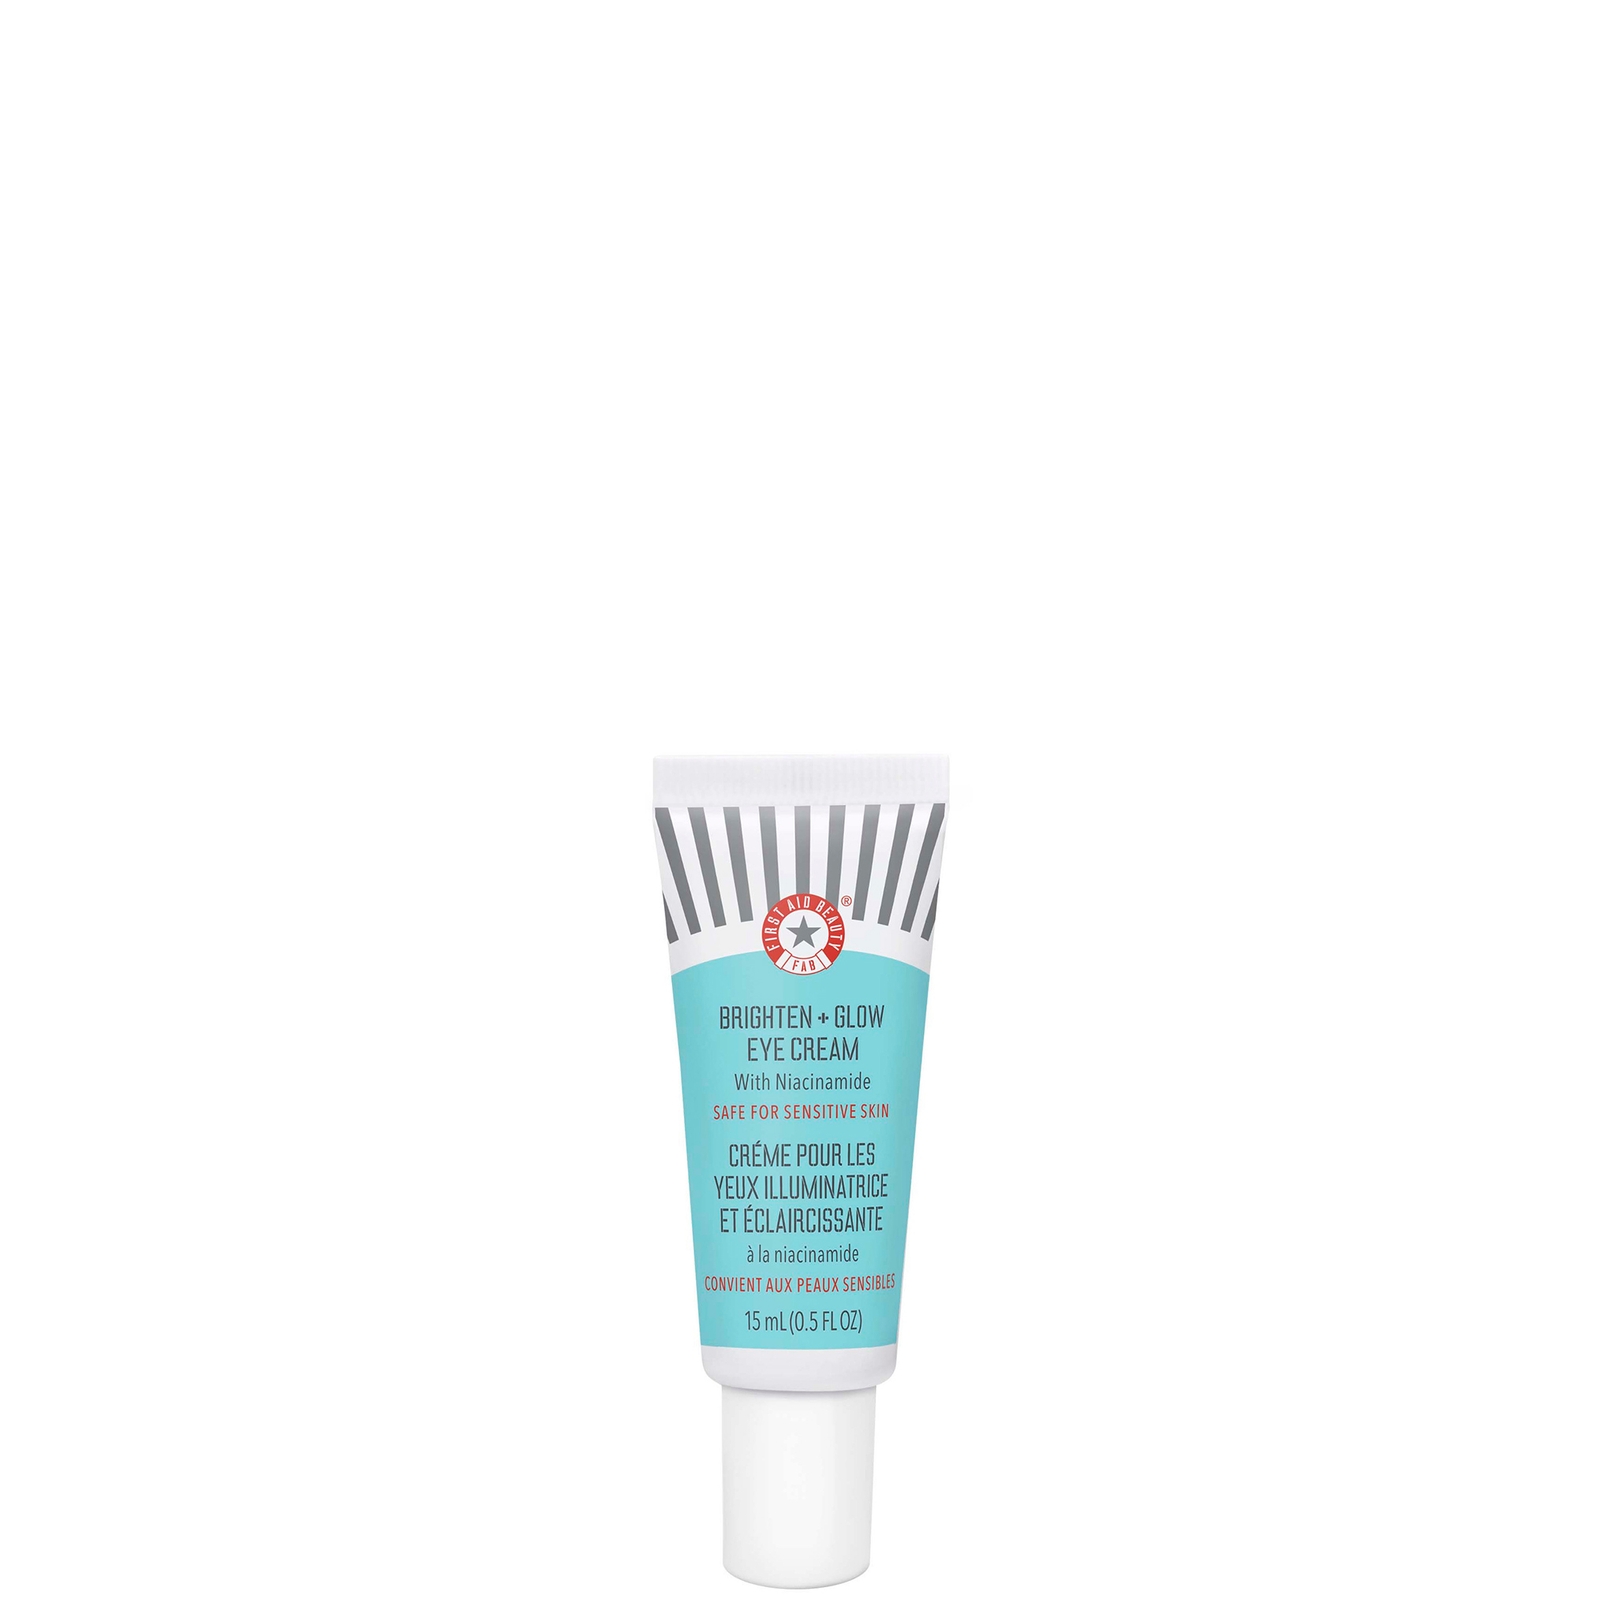 Image of First Aid Beauty Brighten and Glow Eye Cream with Niacinamide 0.5 oz